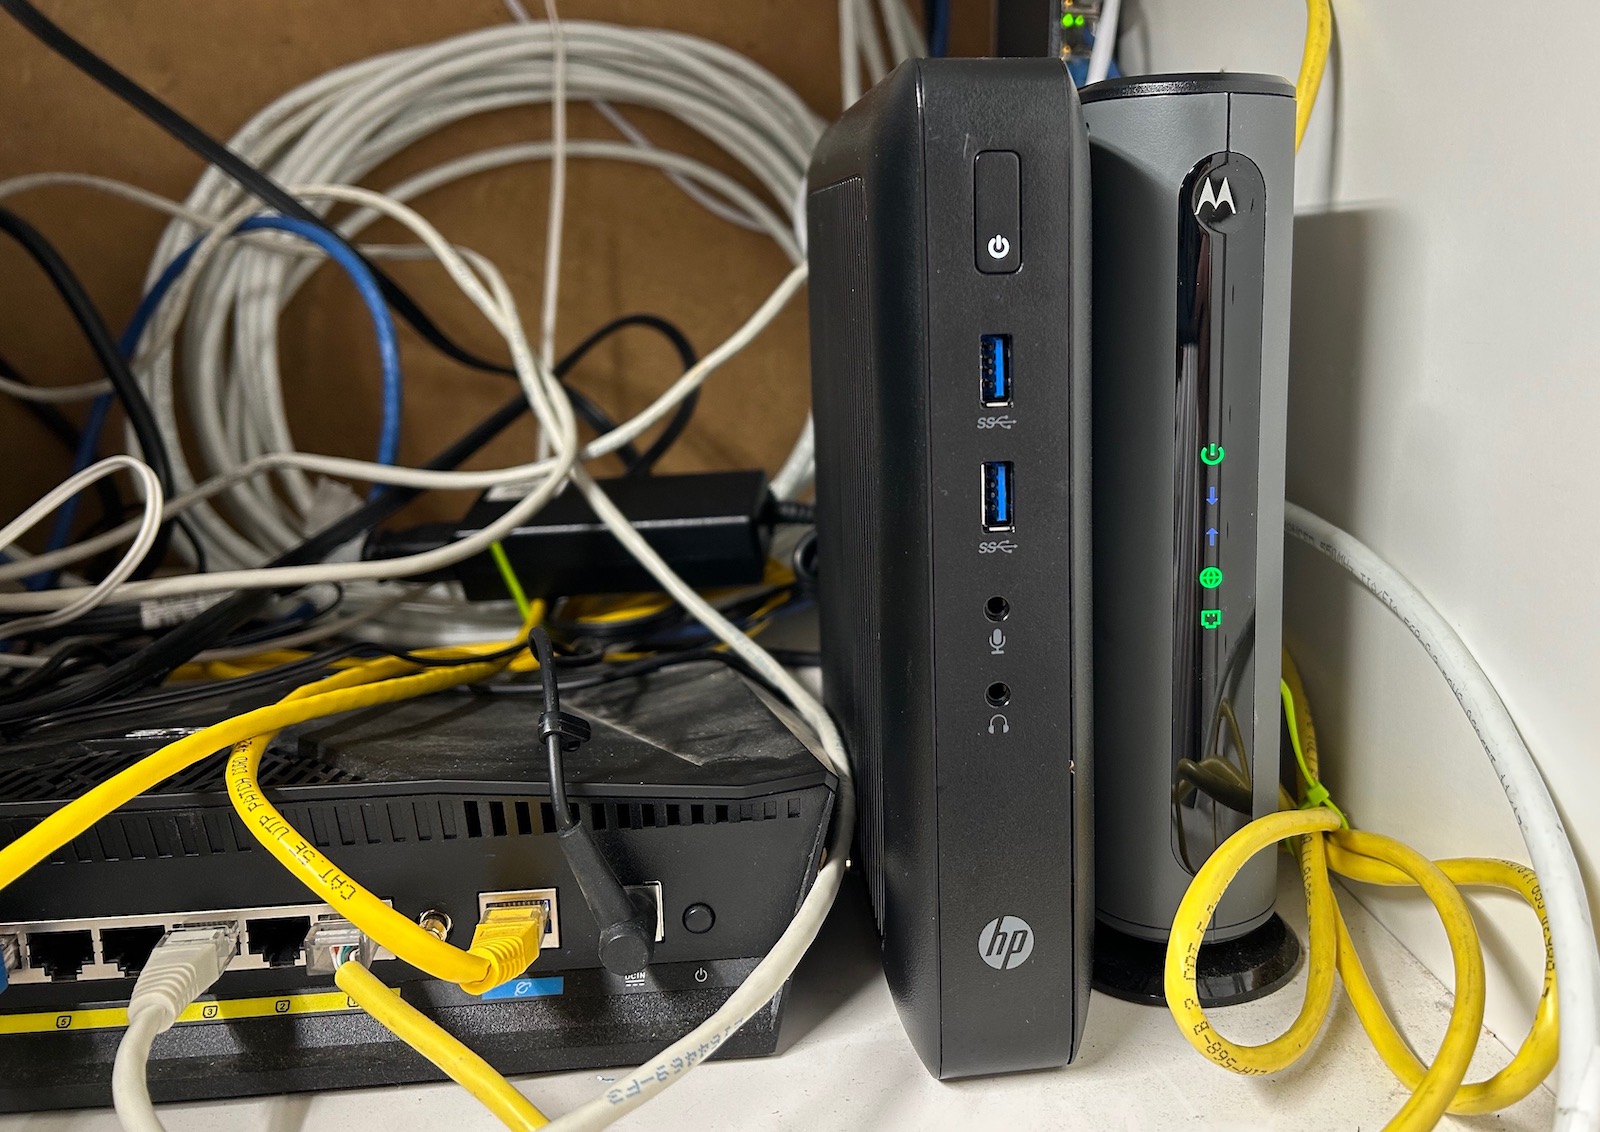 HP t520 next to cable modem in a closet